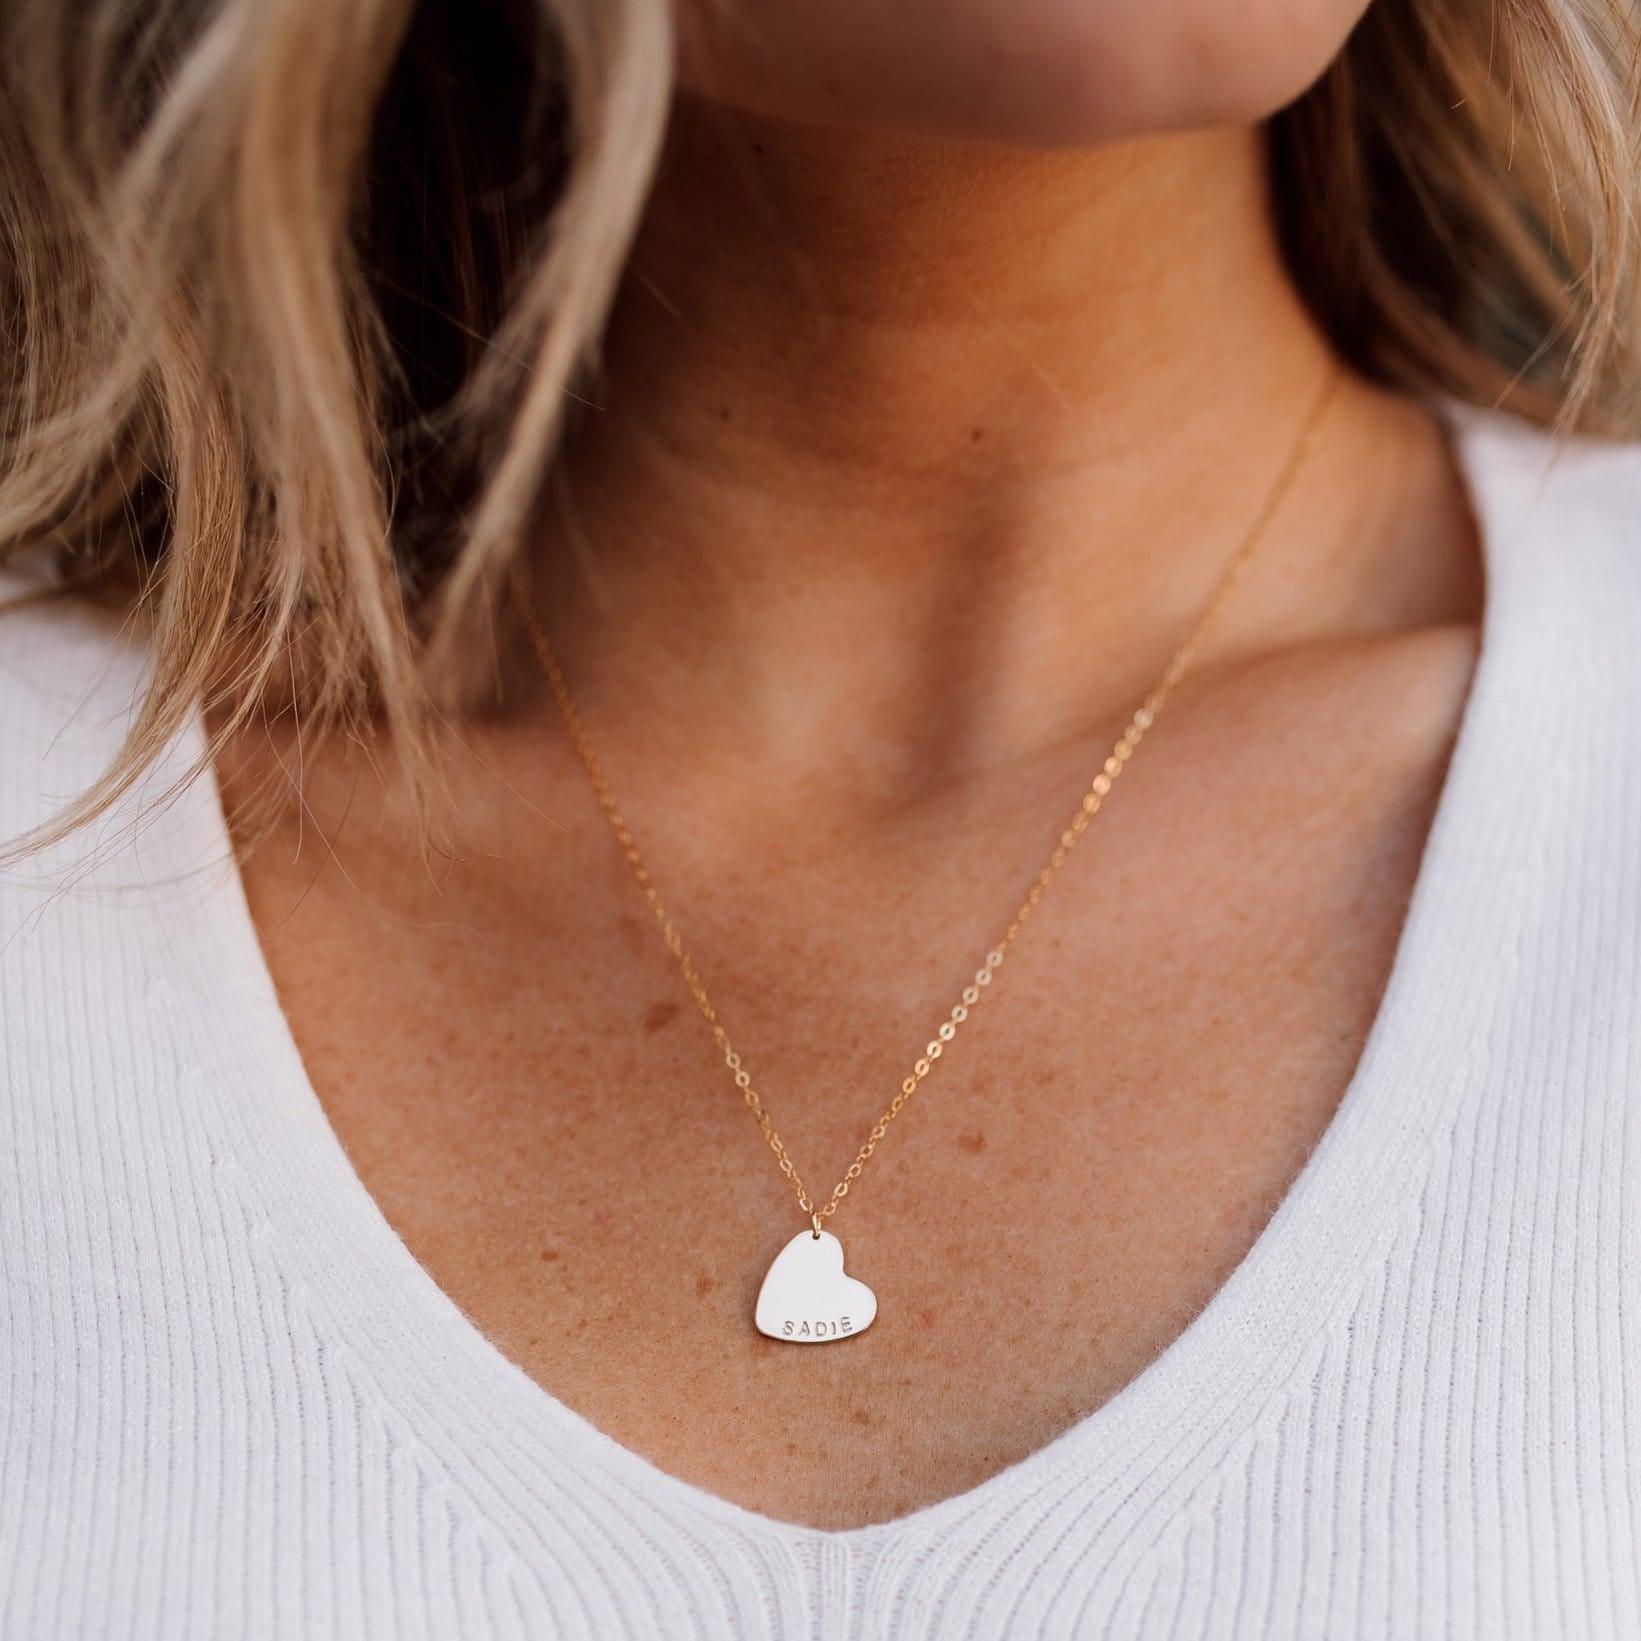 Maeve Heart Necklace - Nolia Jewelry - Meaningful + Sustainably Handcrafted Jewelry